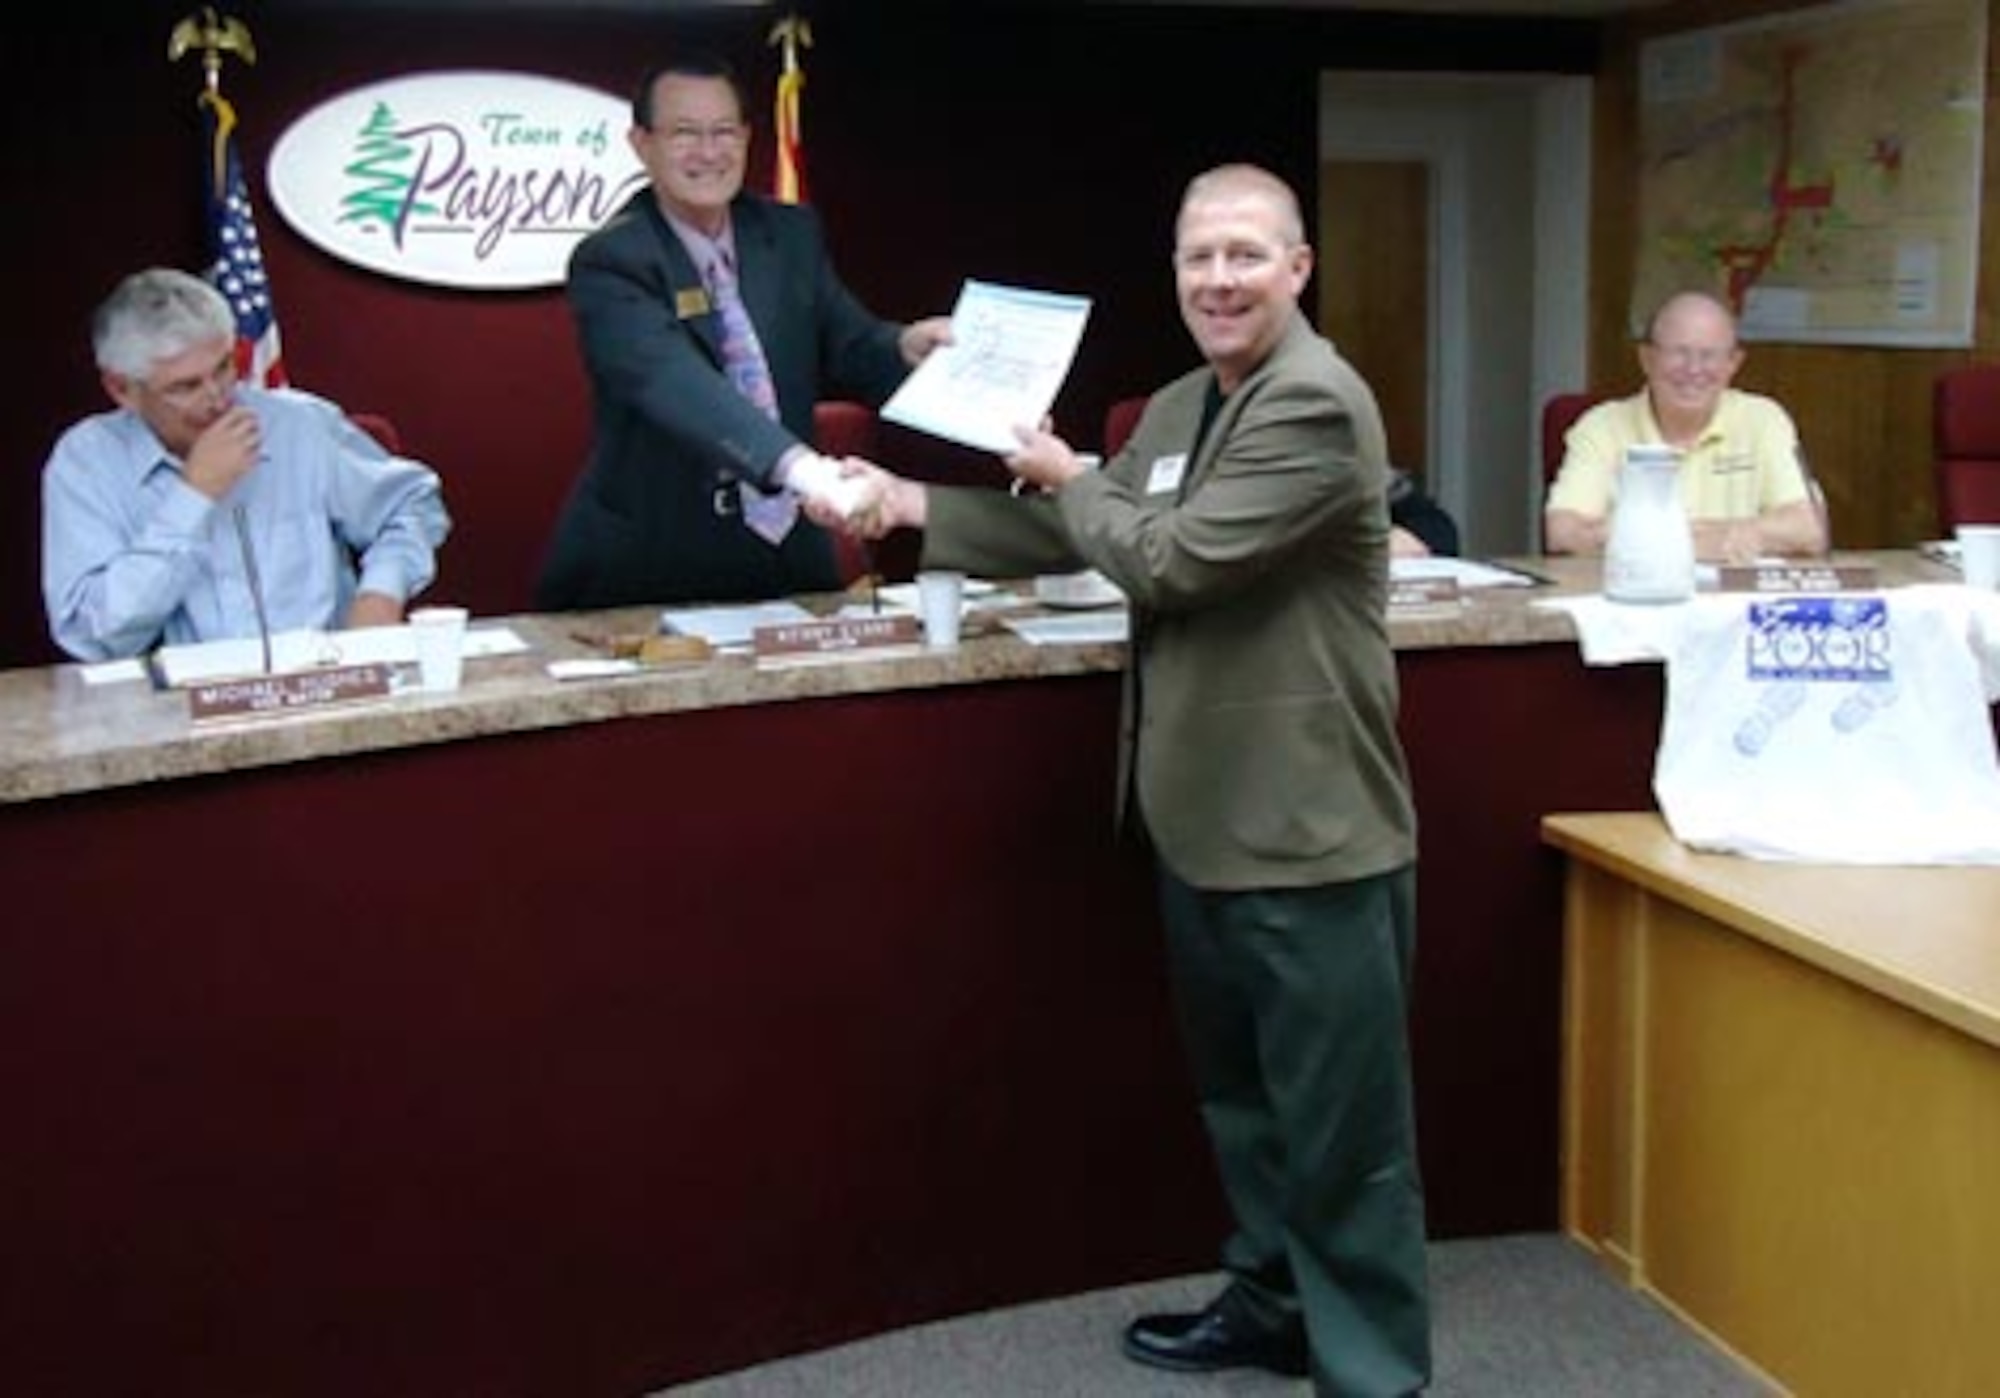 September 8, 2011, Payson, Arizona, Town of Payson, Arizona Mayor Kenny Evans presents Arizona Office for Employer Support of the Guard and Reserve Staff  Member, Butch Wise a Proclamation declaring the week of September 19-23, 2011 as Employer Support of the Guard and Reserve Week.  The Town of Payson has a long history of supporting the Guard and Reserves, and has several Guard and Reserve members who live and serve in the Payson community. (Courtesy photo)

